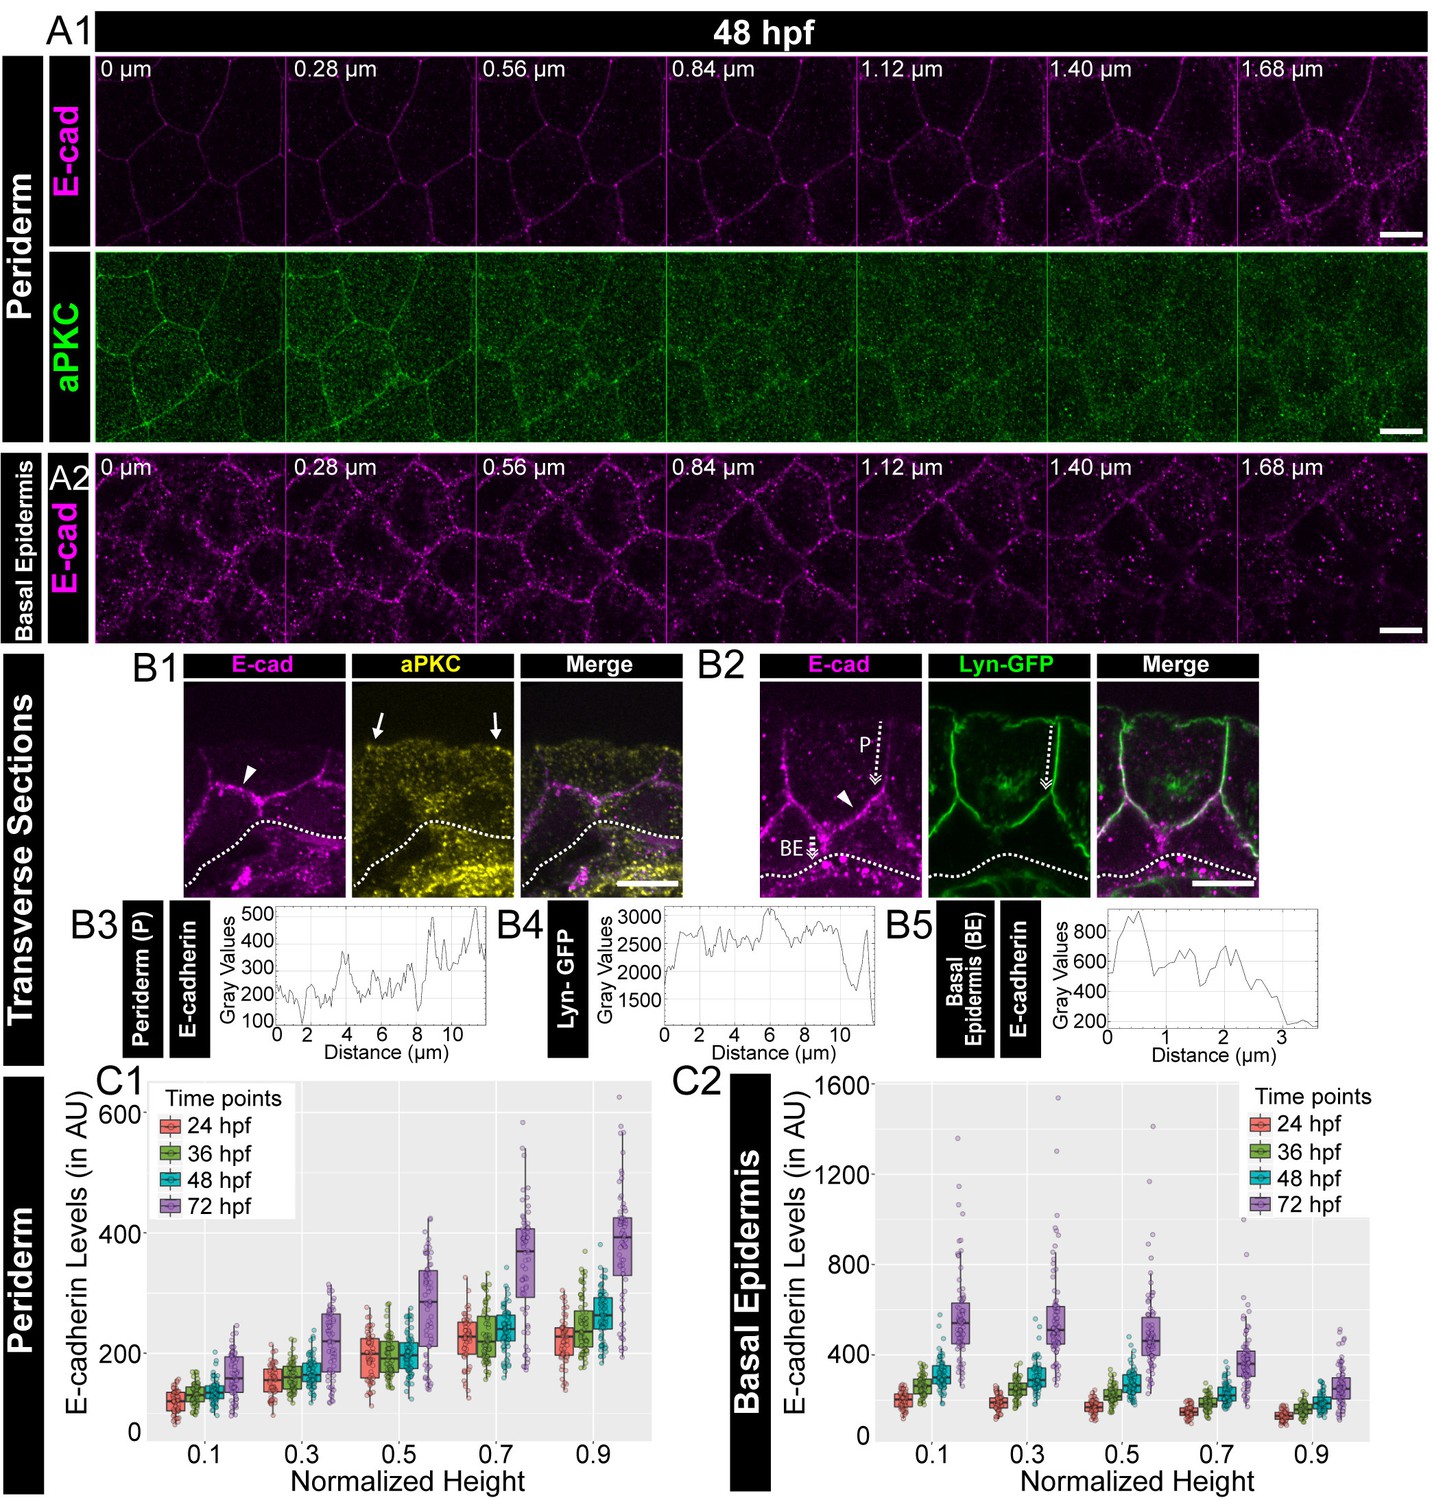 Stepwise Polarisation Of Developing Bilayered Epidermis Is Mediated By Apkc And E Cadherin In Zebrafish Elife